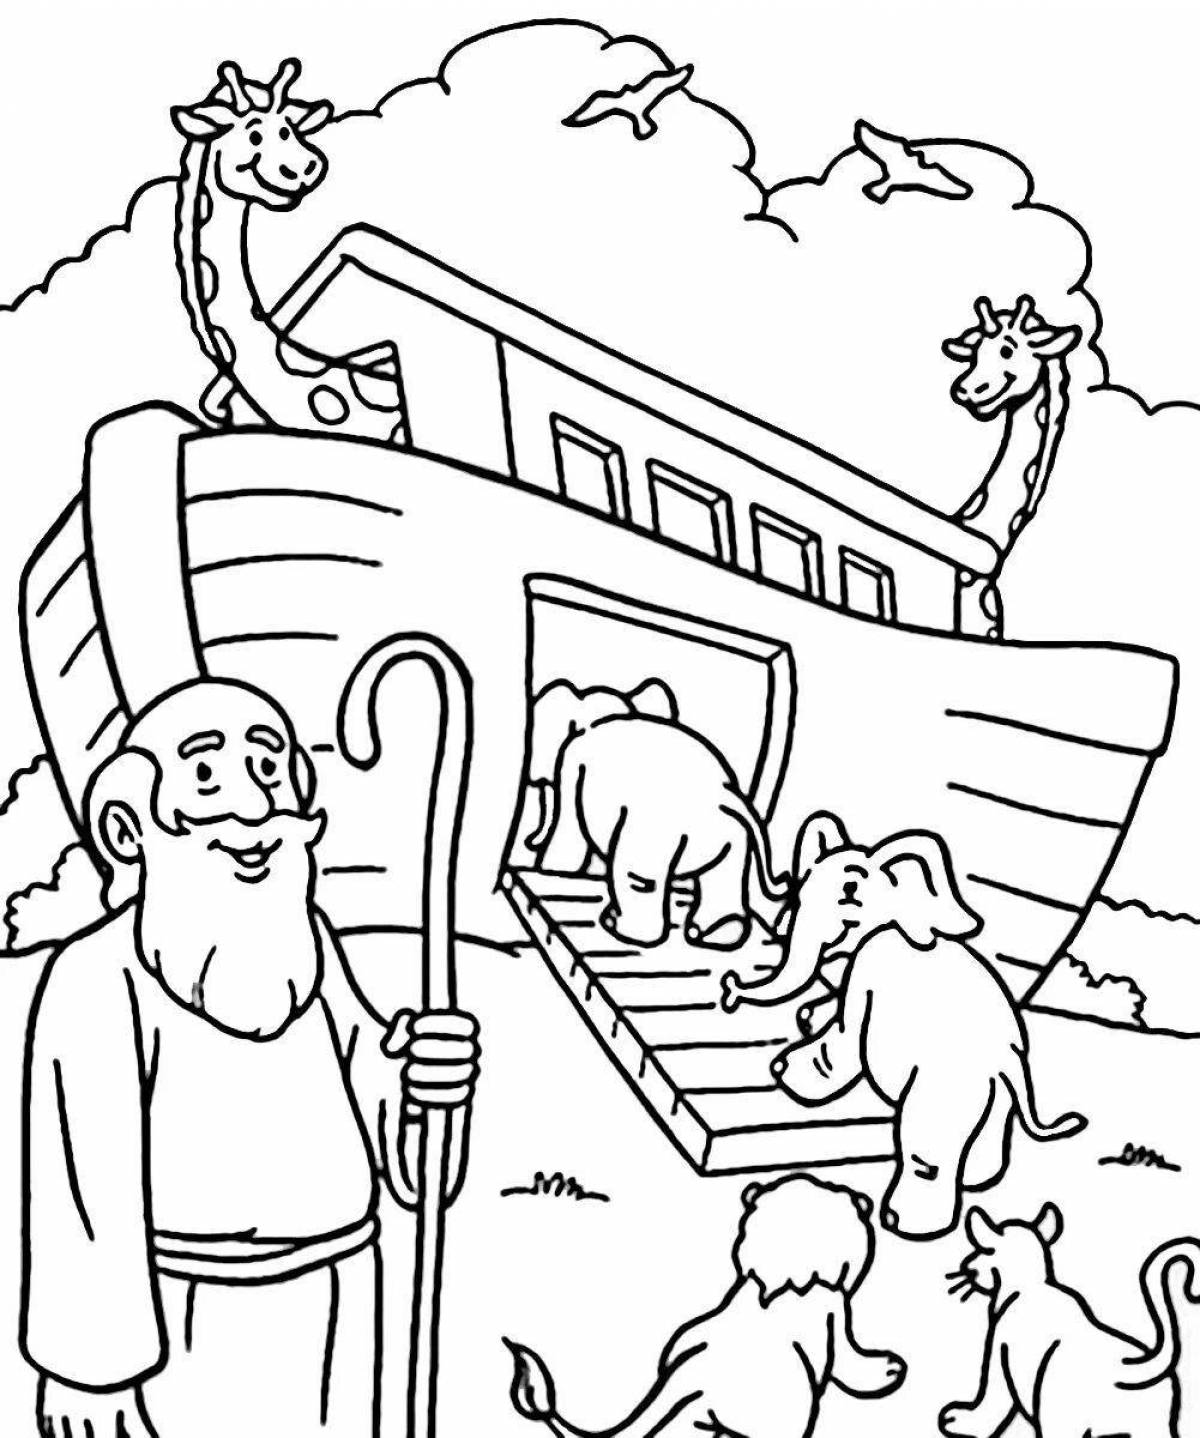 Amazing noah's ark coloring page for kids